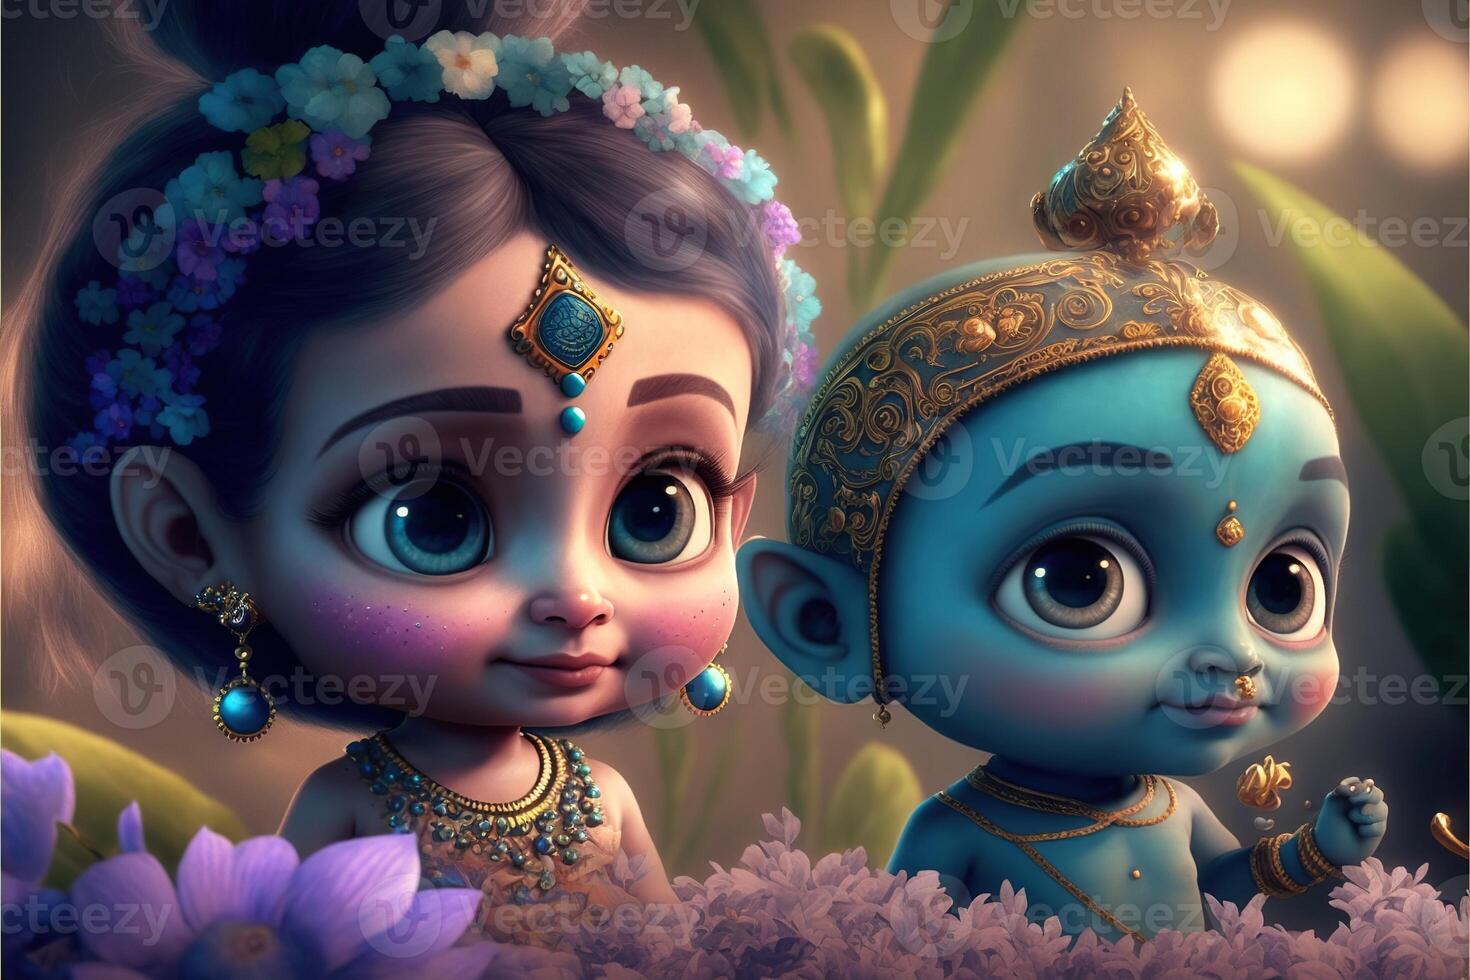 little Krishna and Radha cute image 3D type illustration but ...